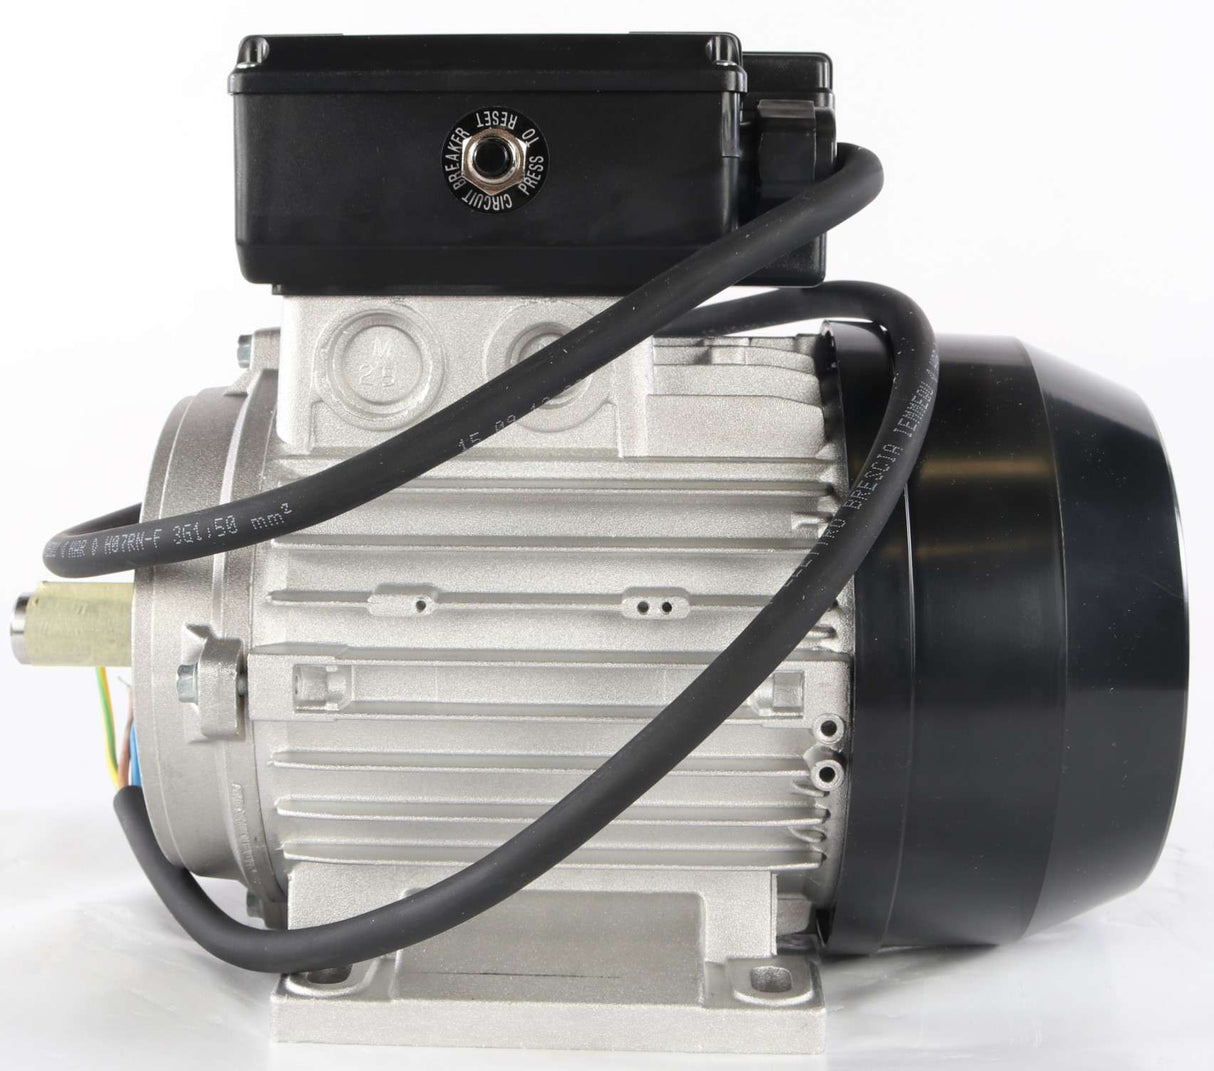 UNIELECTRIC ­-­ 9028730 ­-­ ELECTRIC MOTOR 1.5KW 230V 50HTZ 7.3A